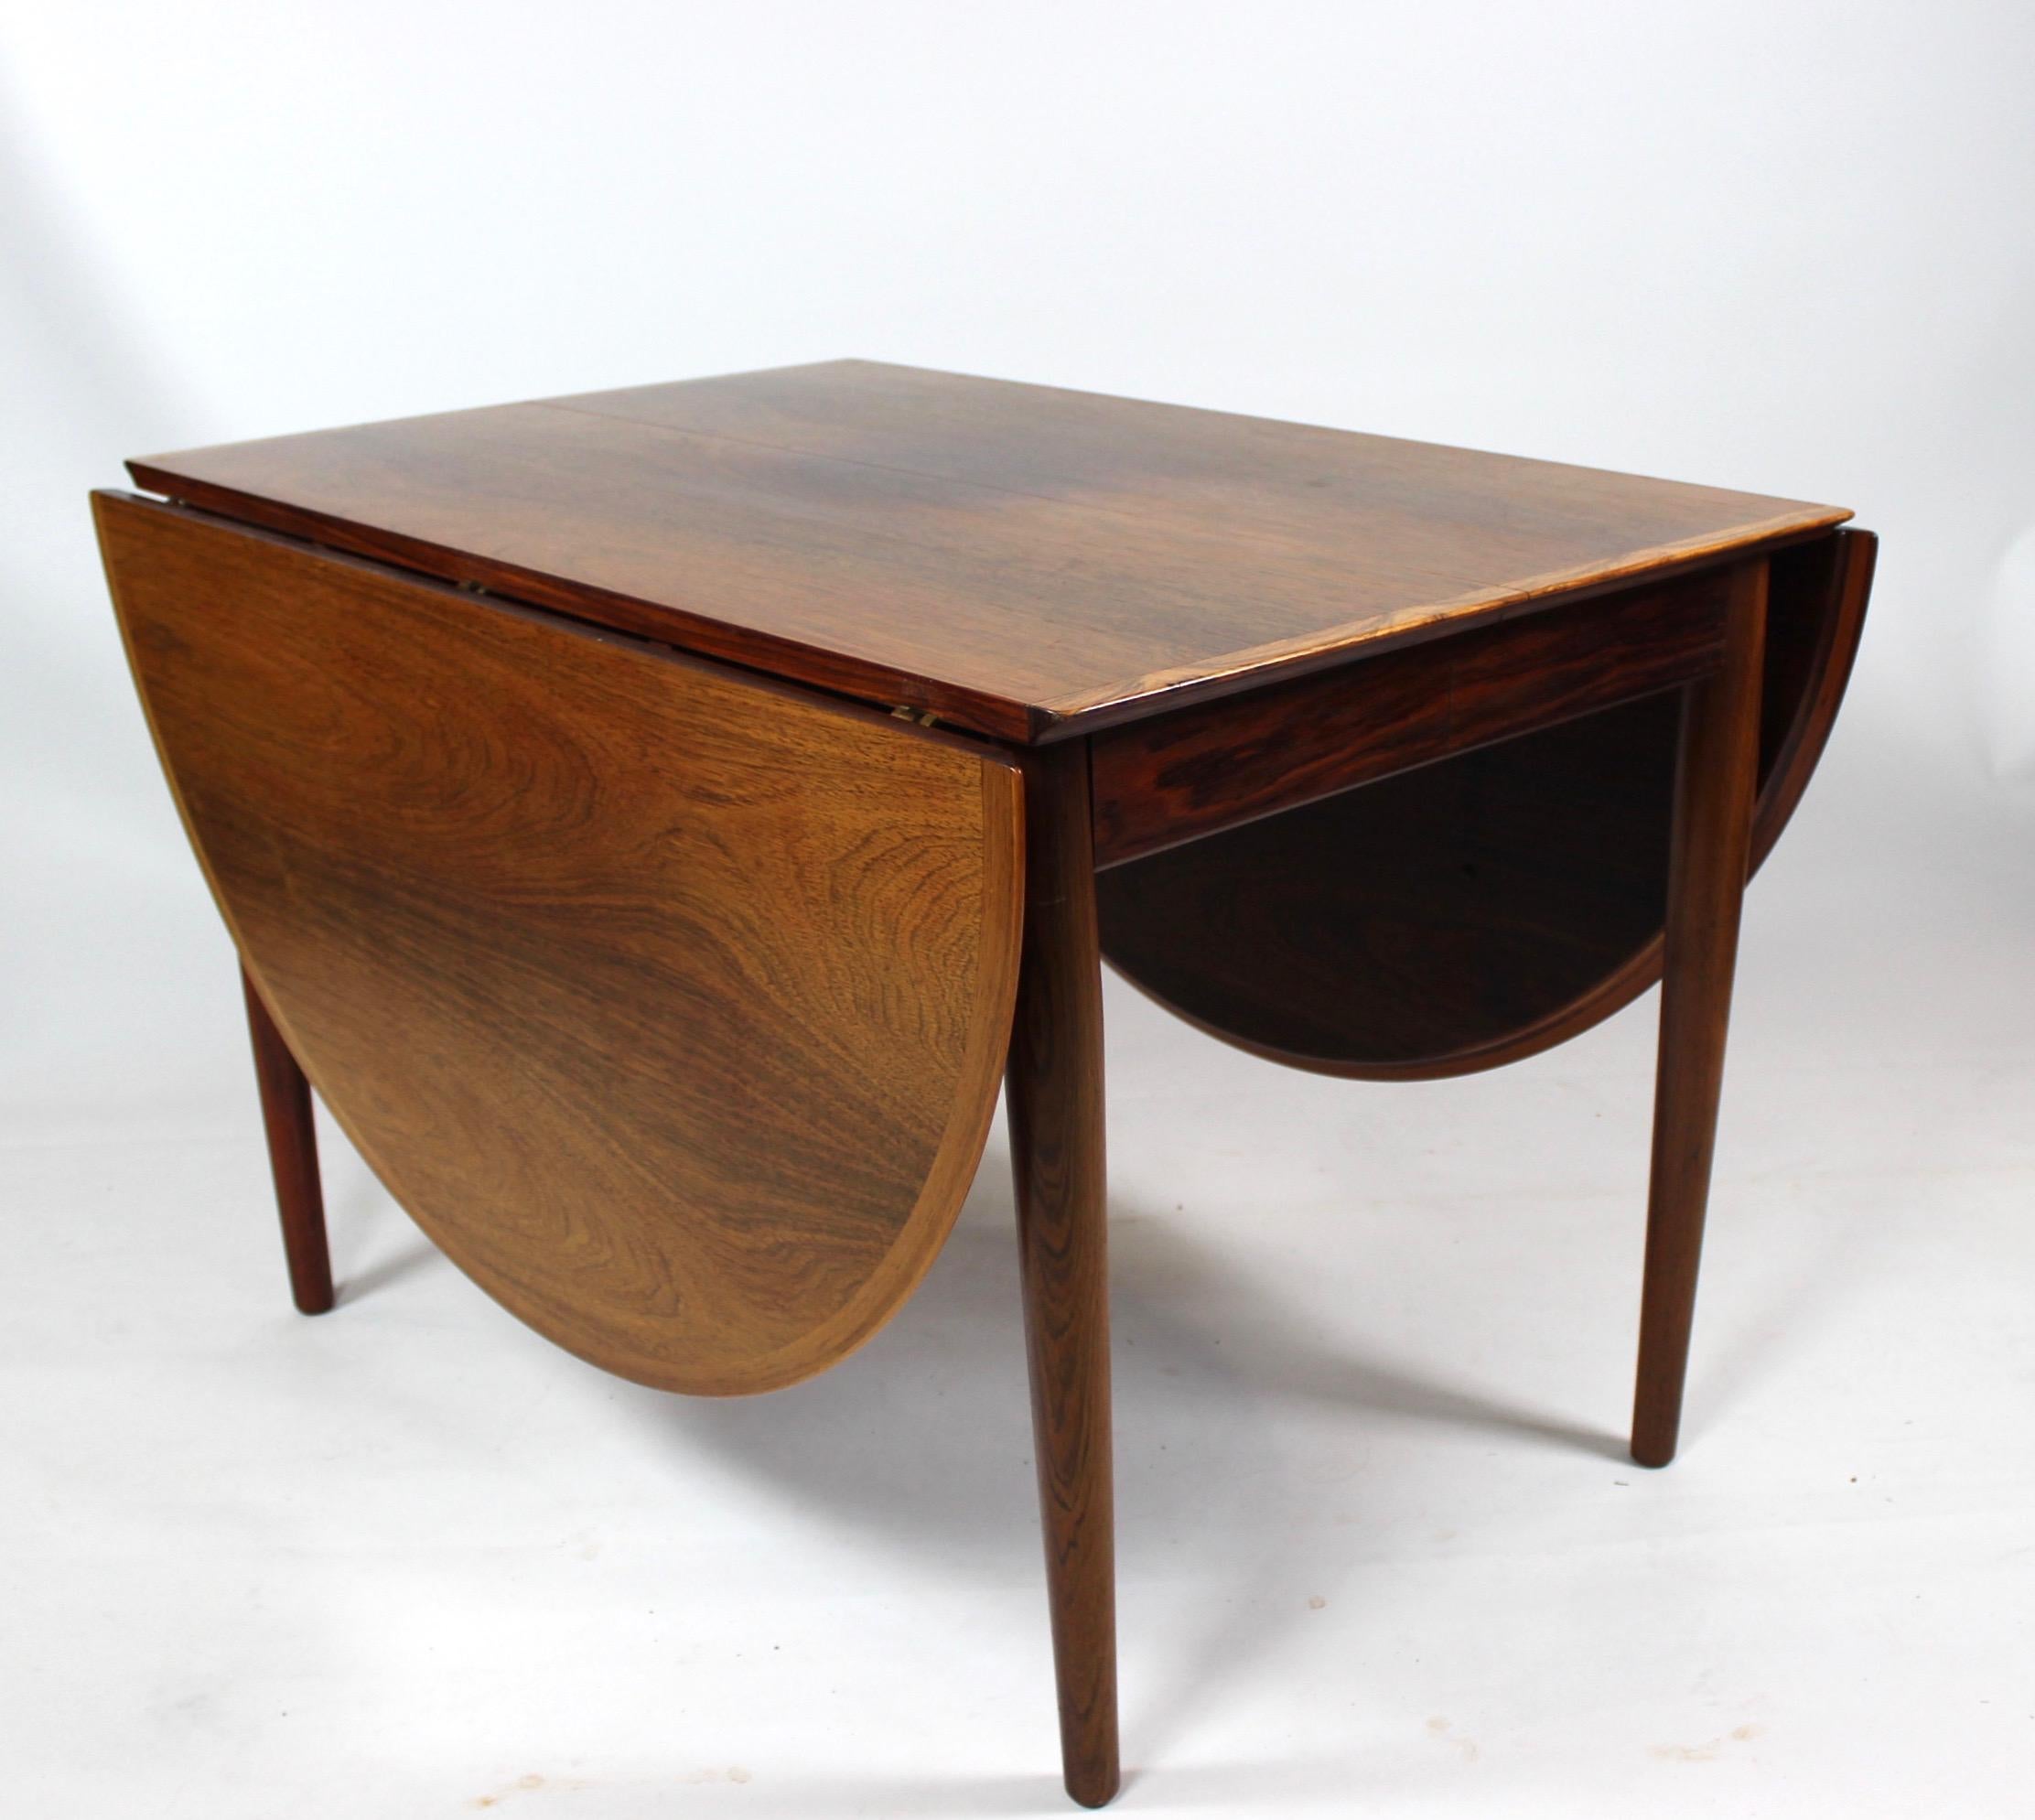 Arne Vodder 1960s Rosewood Dining Table with Extensions For Sale 2